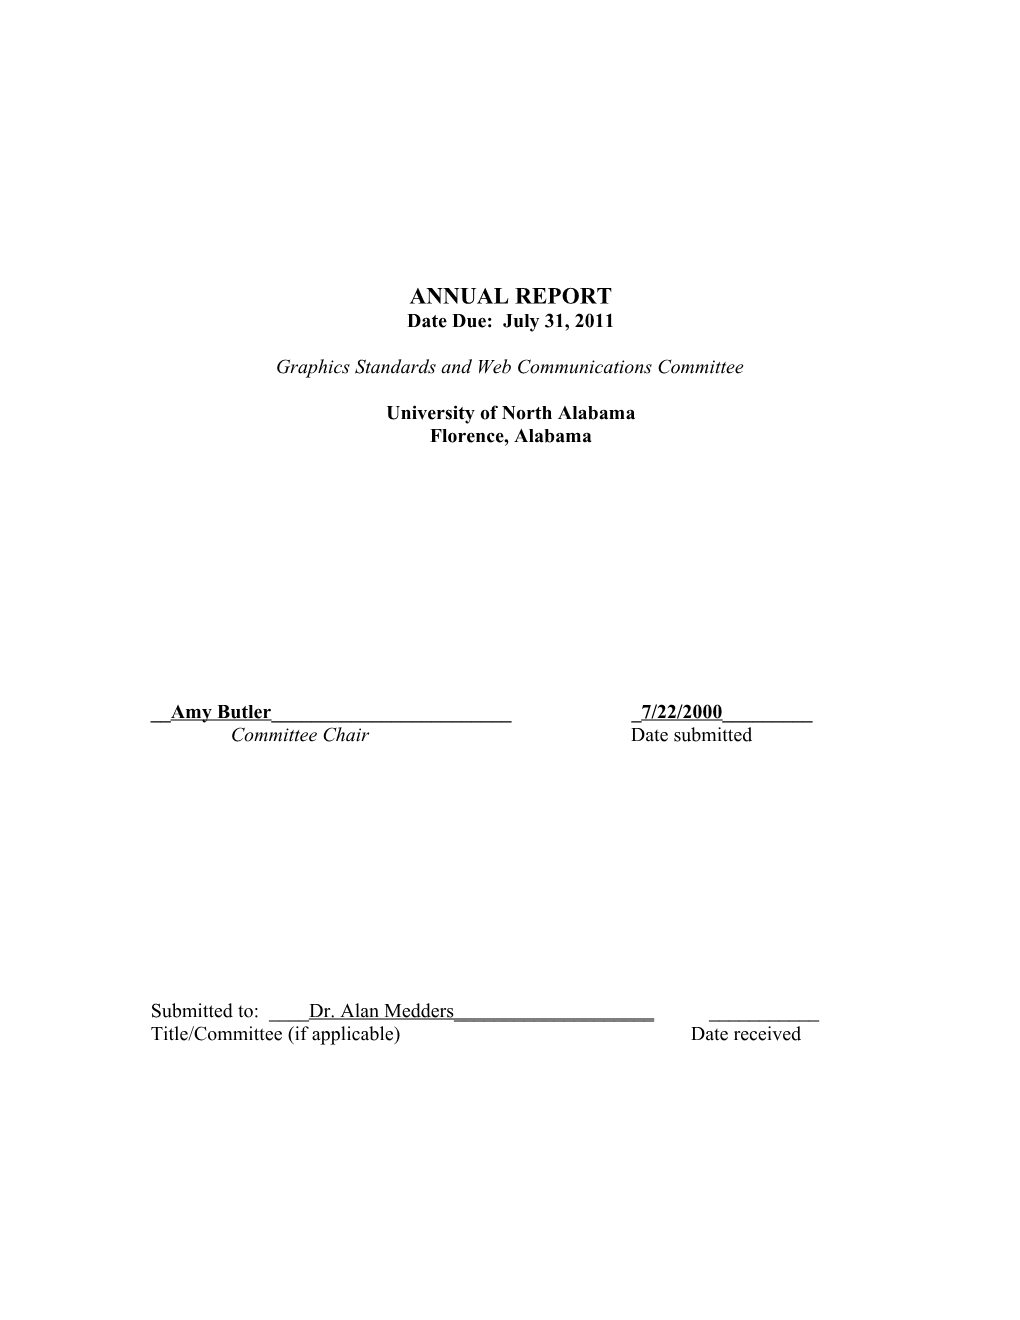 Shared Governance Committee Annual Report Template